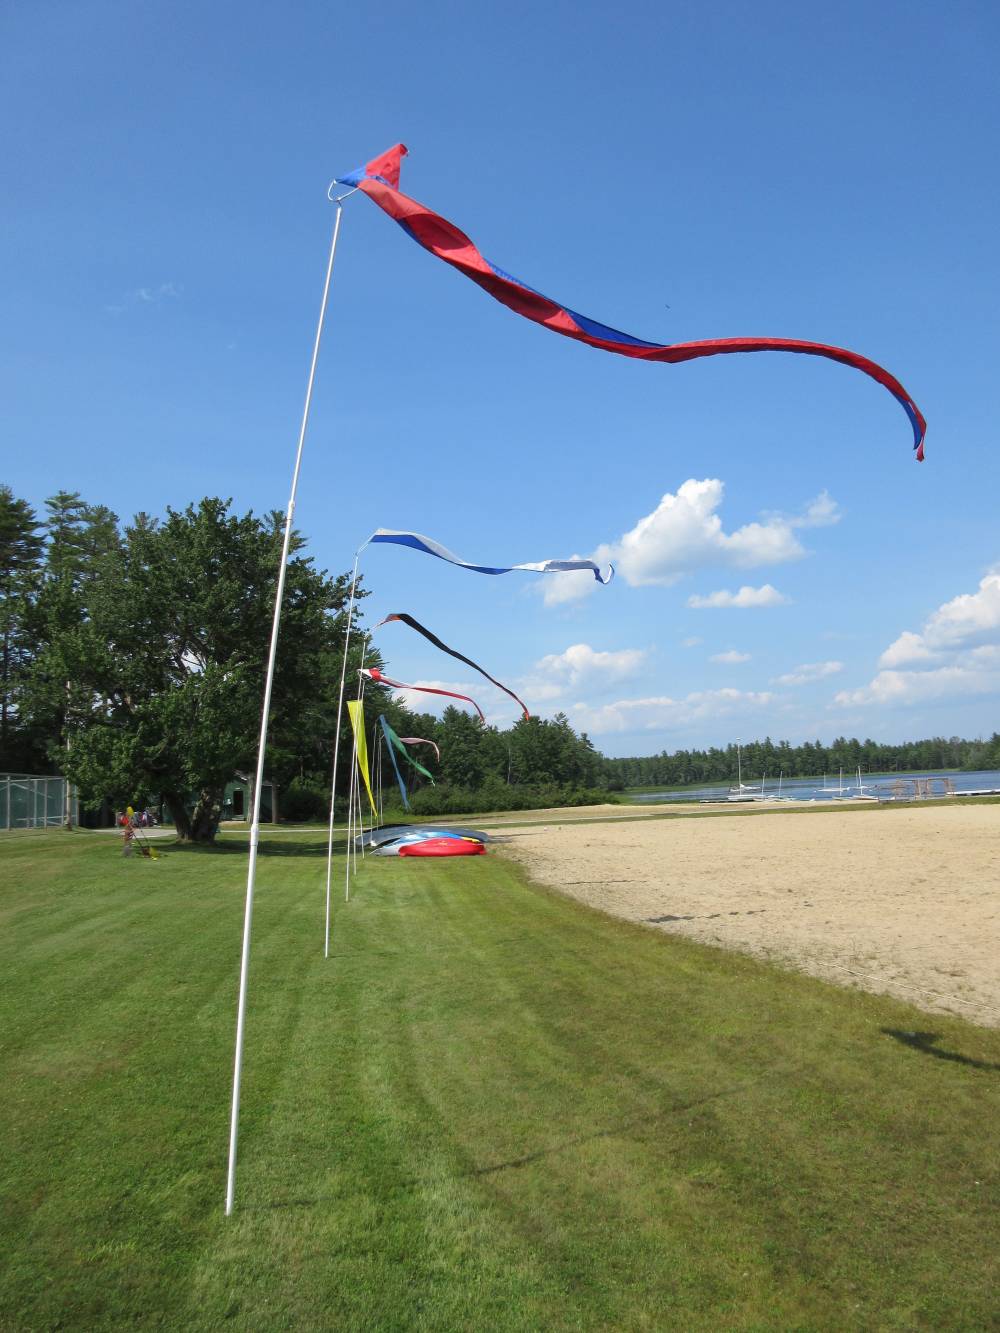 TOP MAINE SLEEPAWAY CAMP: Tripp Lake Camp is a Top Sleepaway Summer Camp located in Poland Maine offering many fun and enriching Sleepaway and other camp programs. 